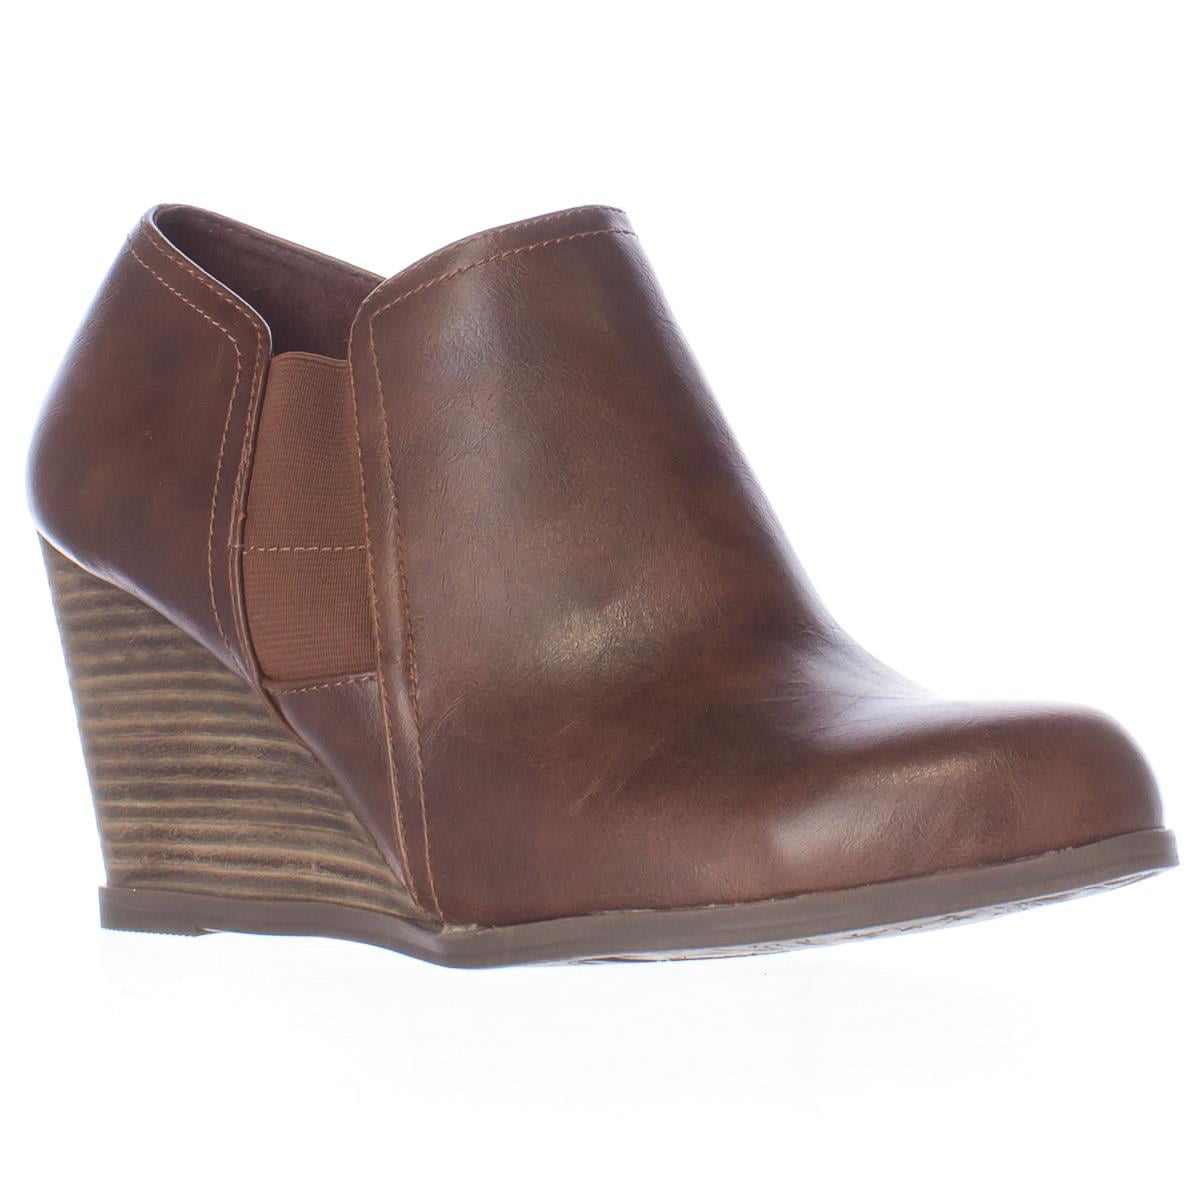 Dr. Scholl's Shoes - Womens Dr. Scholl's Primo Wedge Booties - Whiskey ...